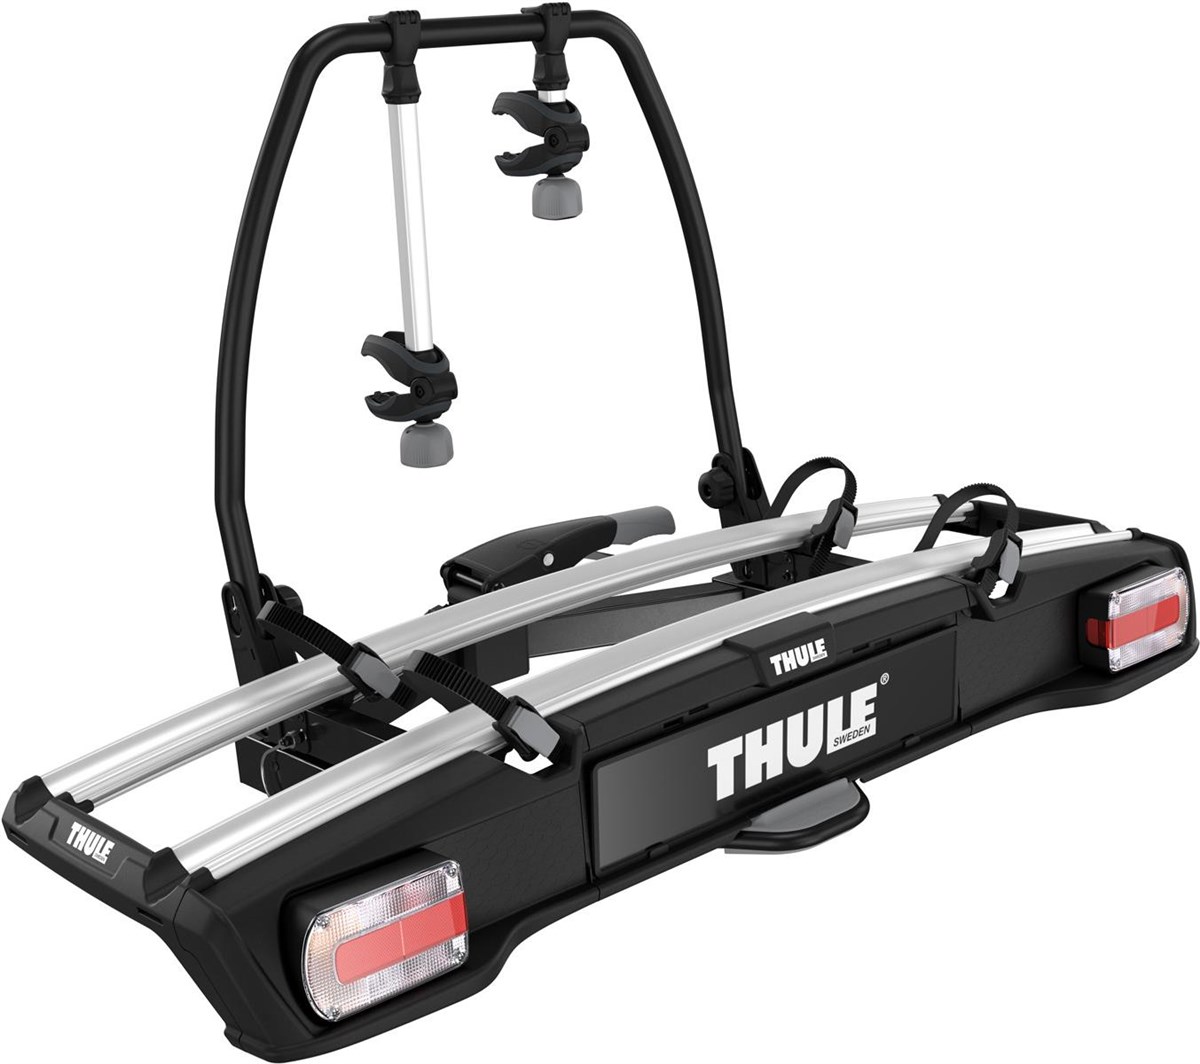 Thule 918 VeloSpace 2-Bike Towball Carrier 7-Pin product image